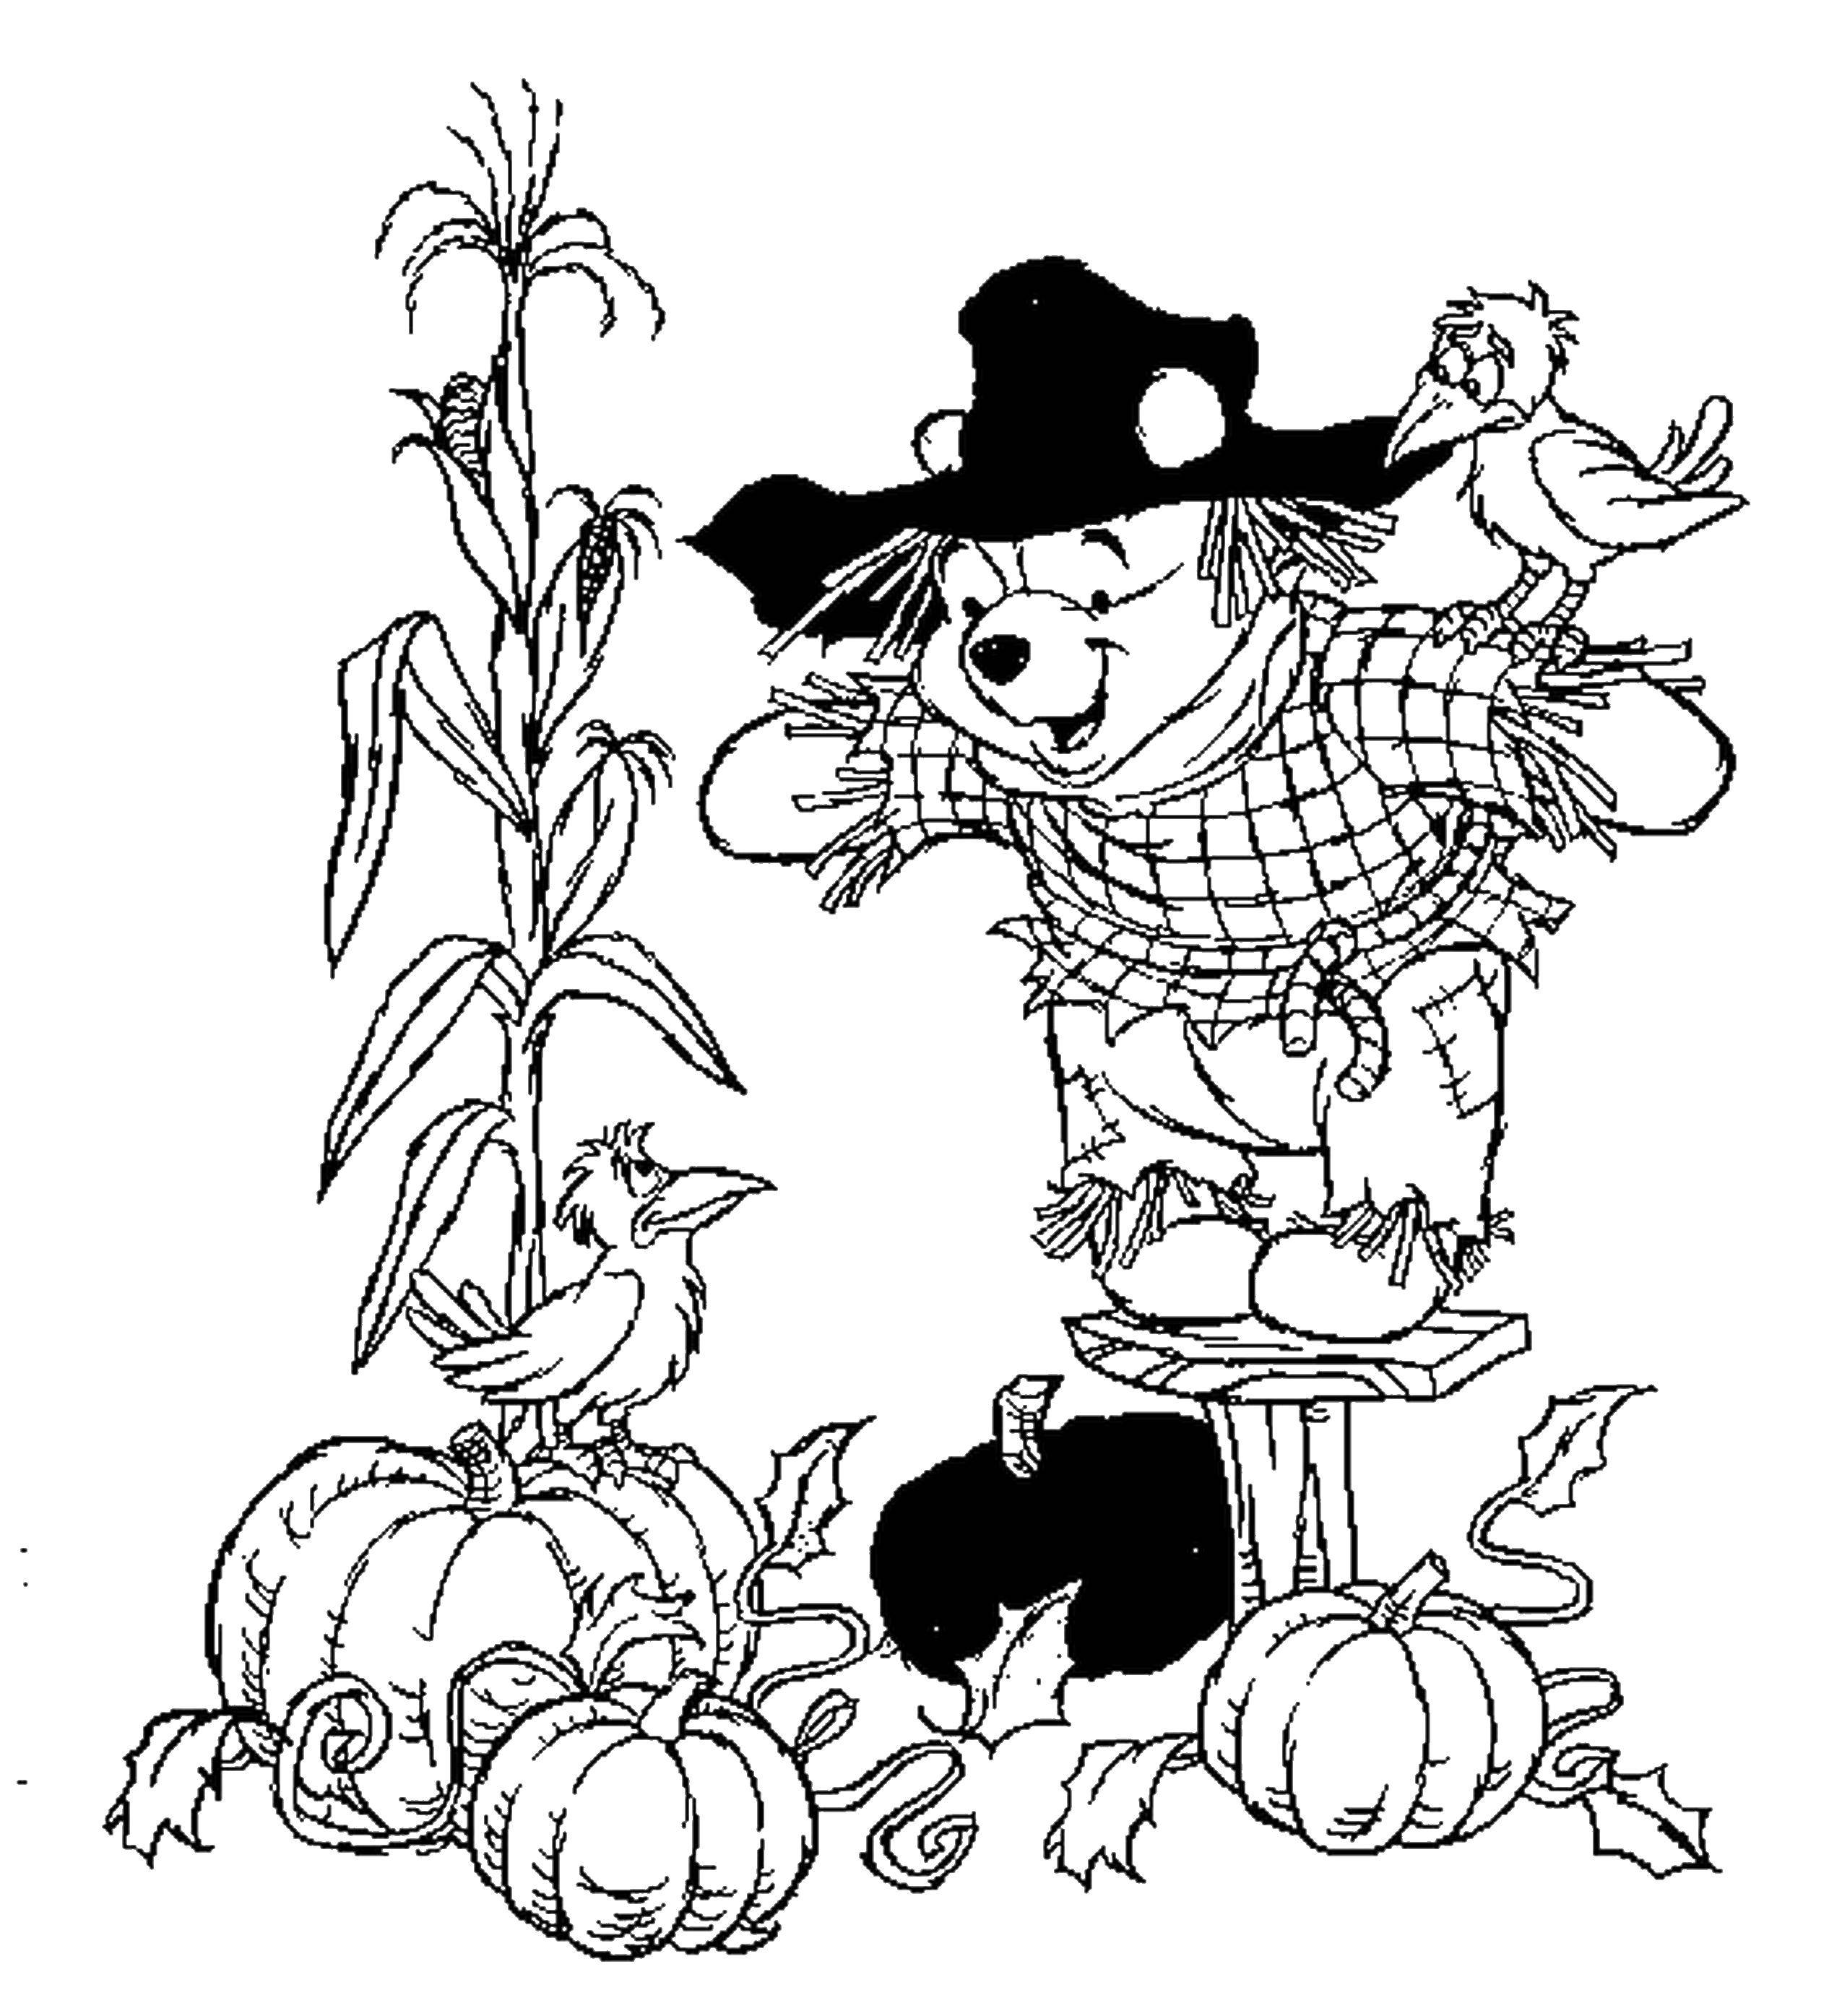 Coloring Winnie the Pooh in costume Scarecrow guards the garden. Category Autumn. Tags:  a Scarecrow, pumpkins, Winnie the Pooh.